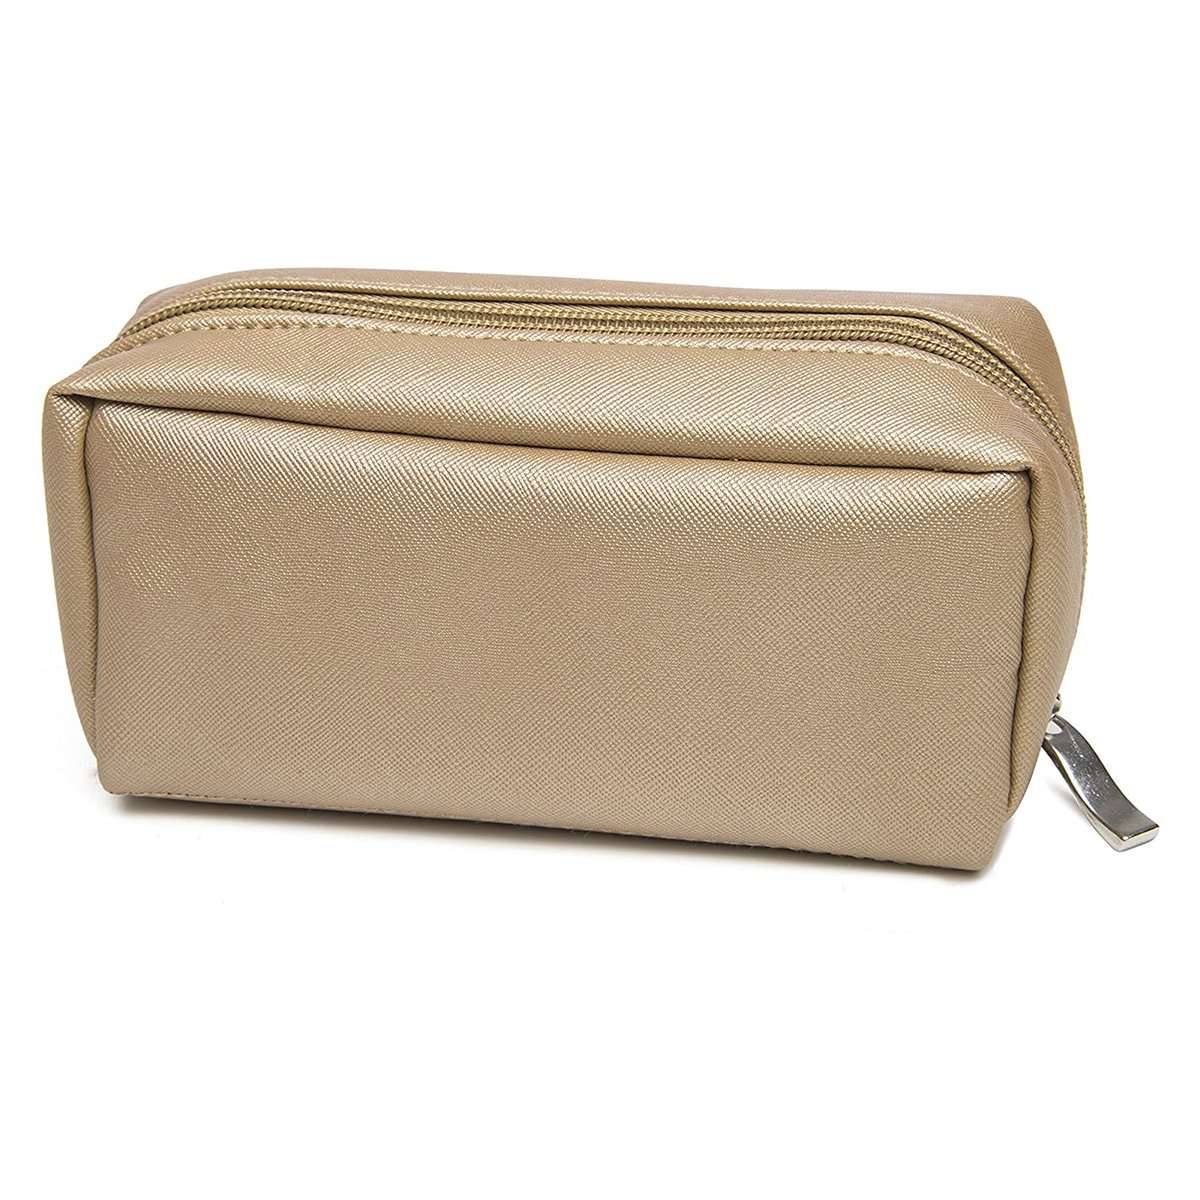 Essential Oil Carrying Case (Metallic Gold) - Your Oil Tools